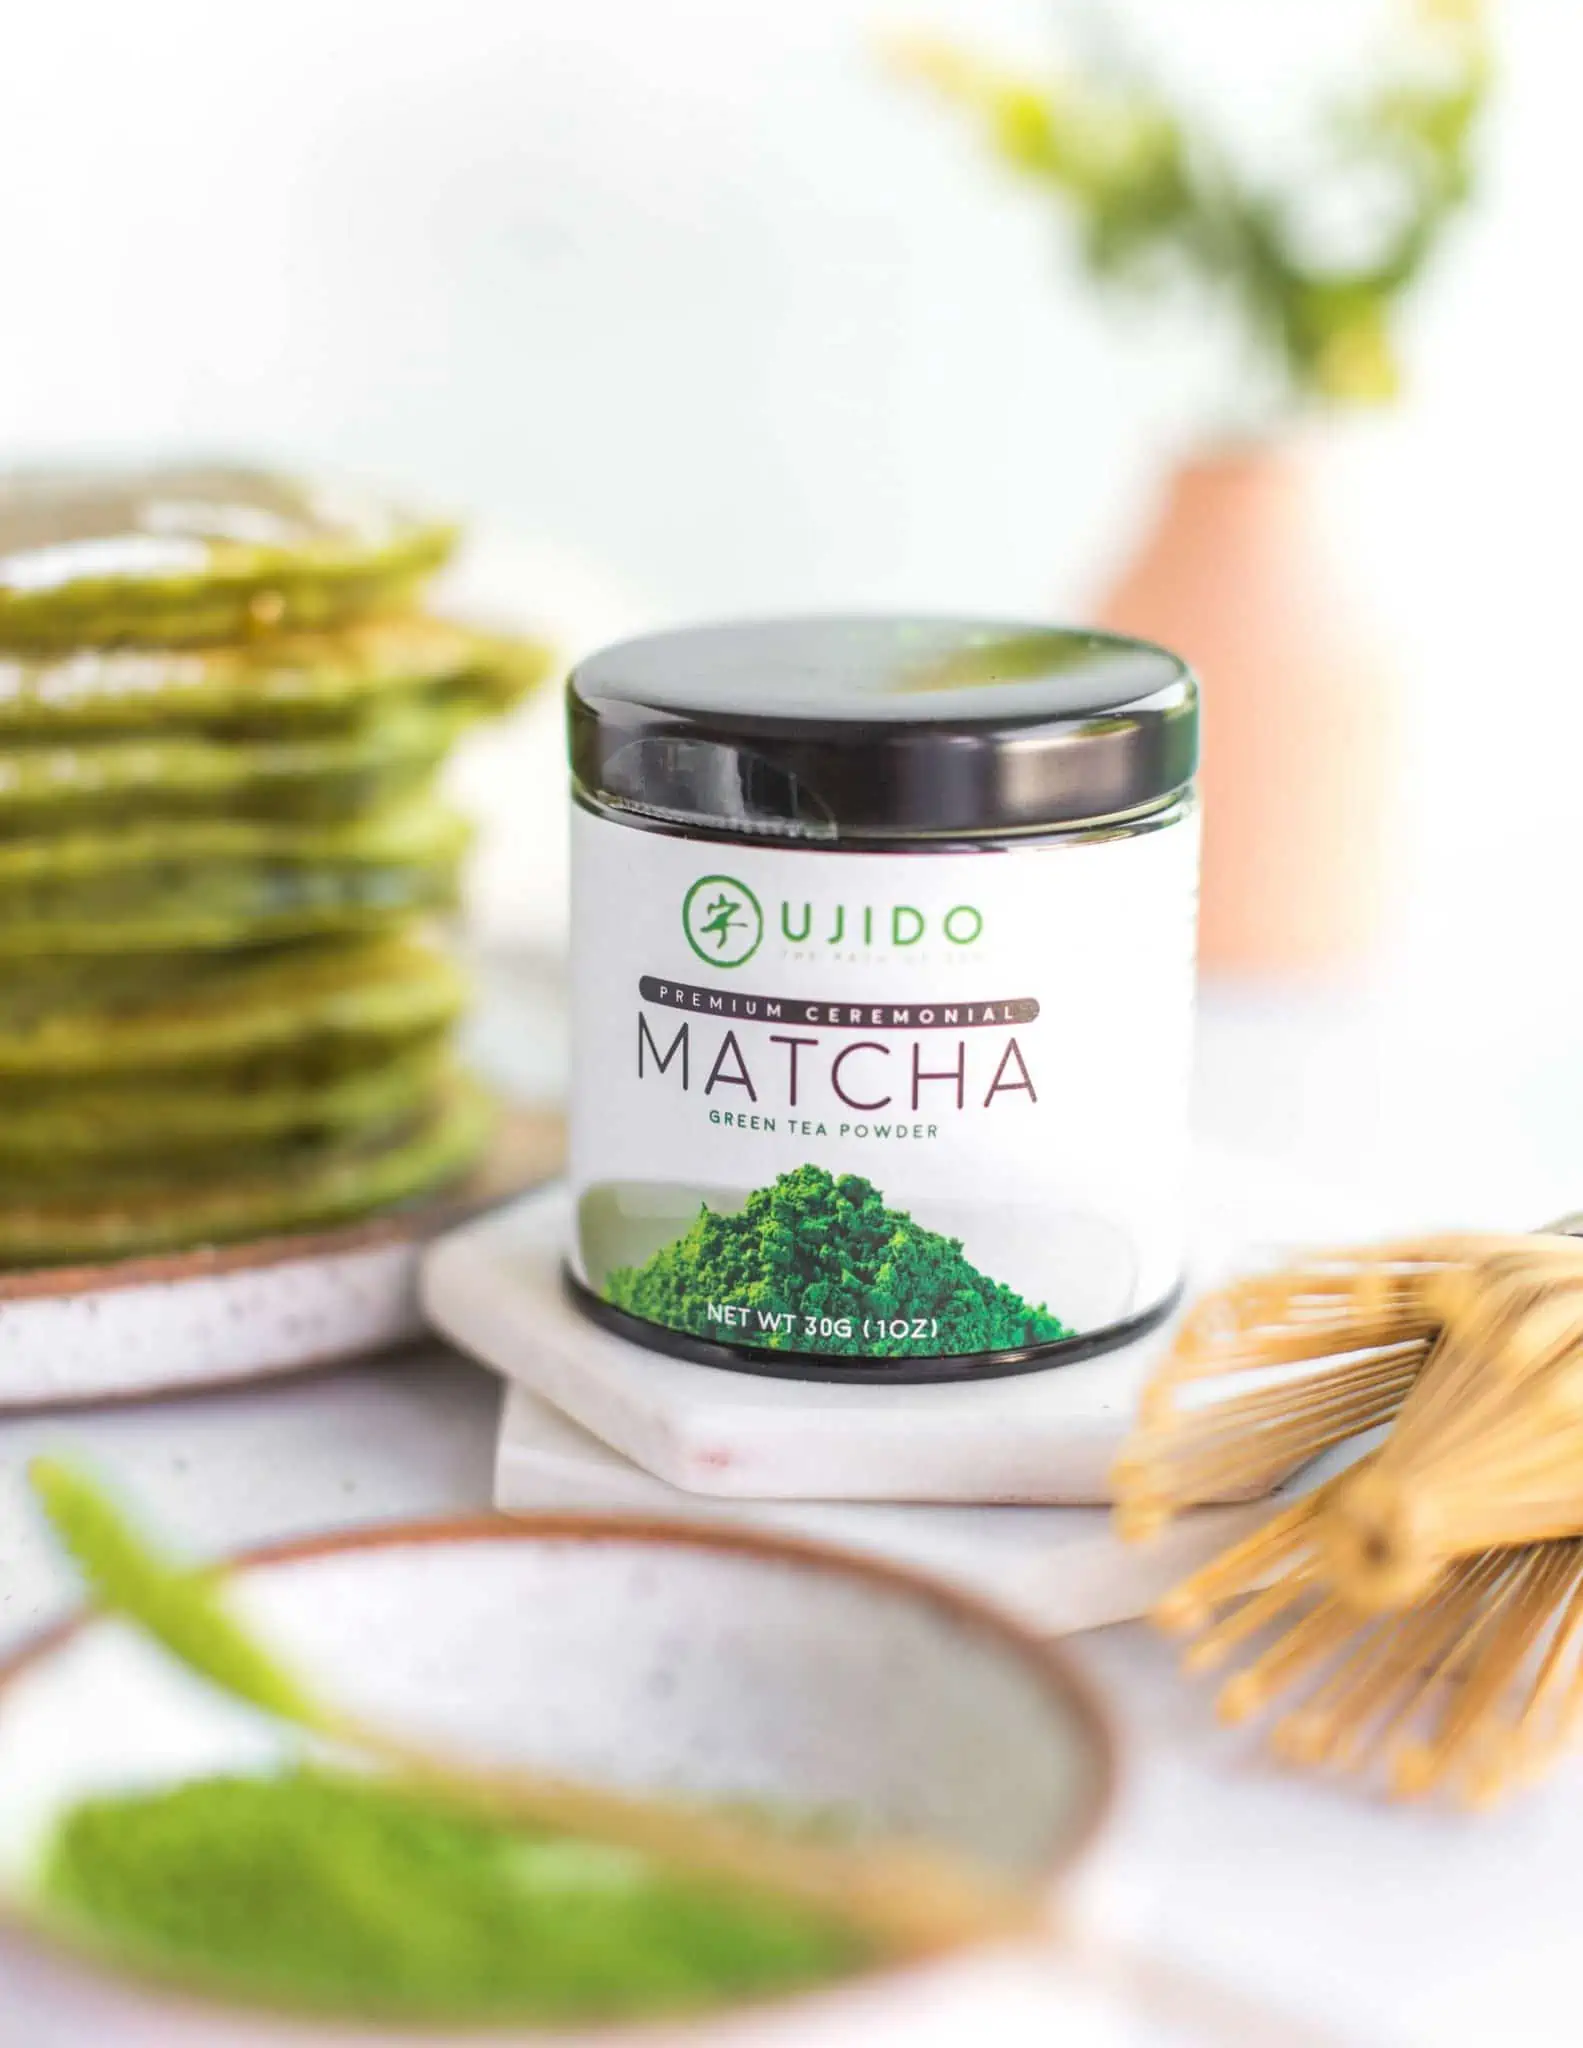 Ujido Ceremonial Matcha Powder Tin with a Whisk and Bamboo Scoop